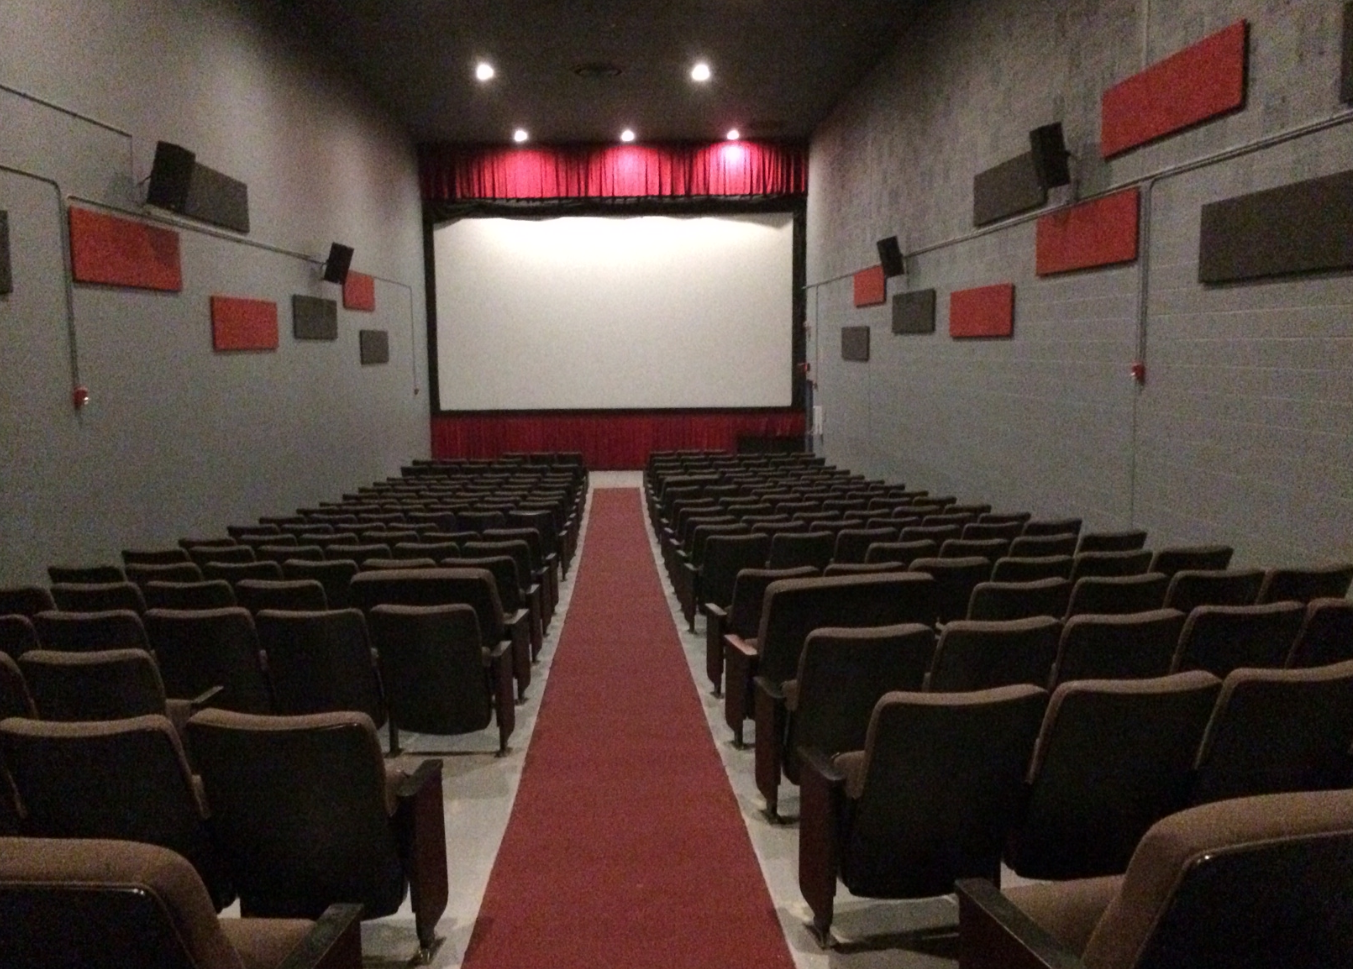 Brand new theater - the Plaza - Maplewood - 2013 - Woodland Hills 